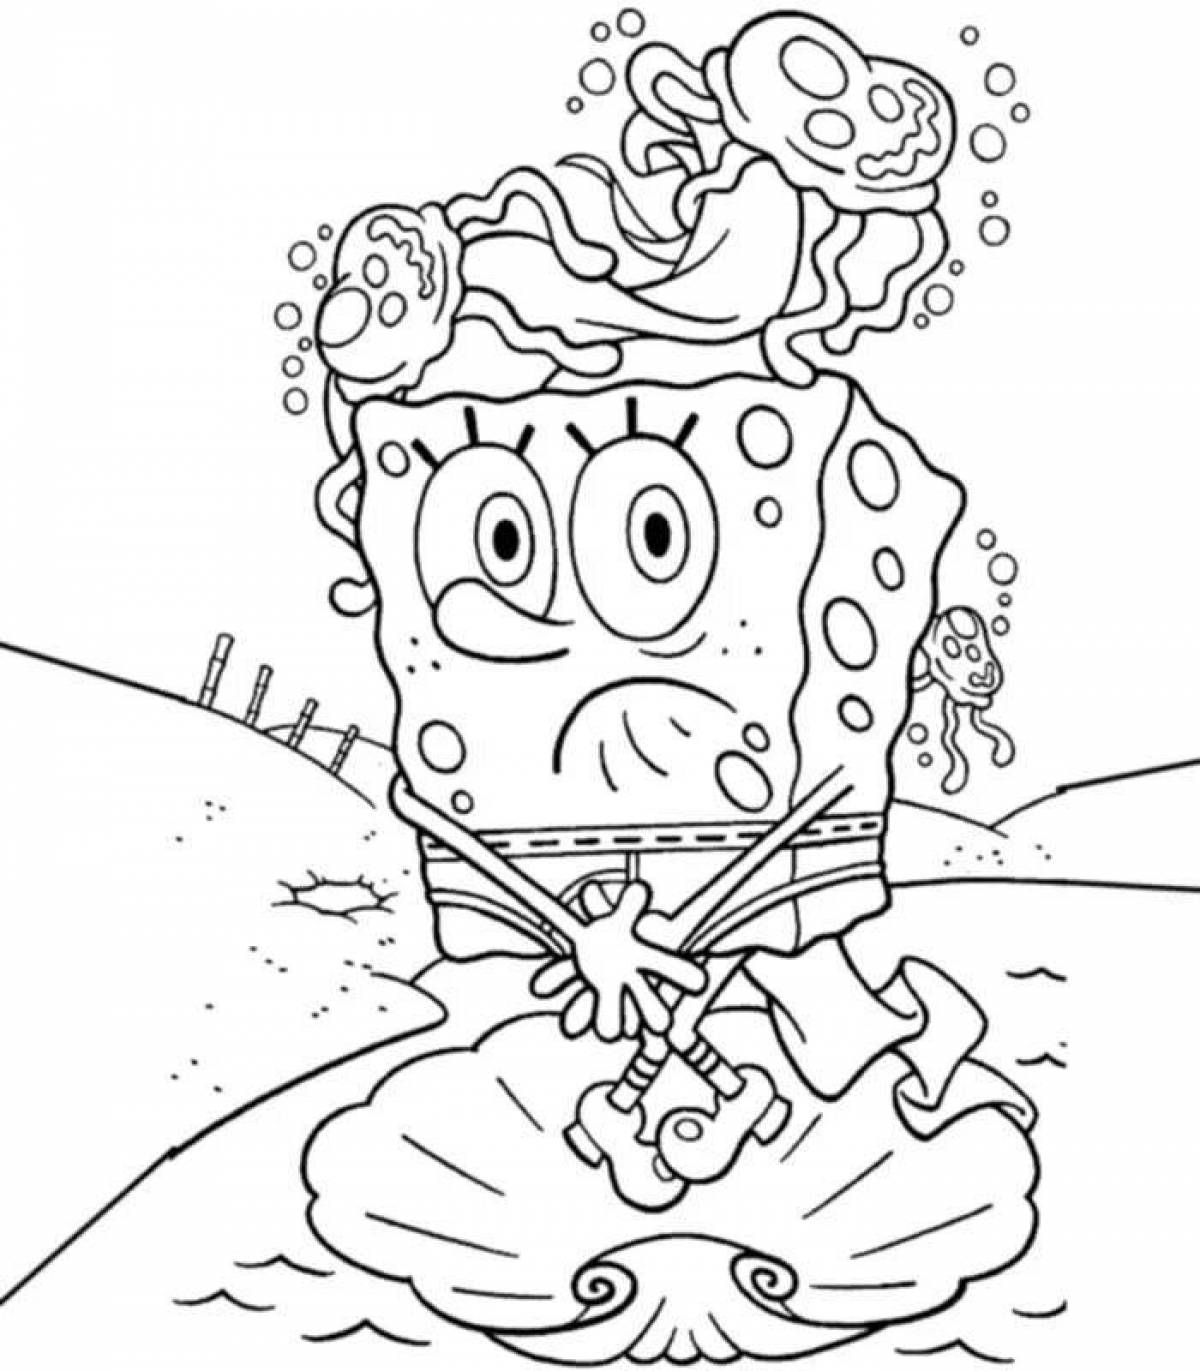 Coloring funny spongebob by numbers